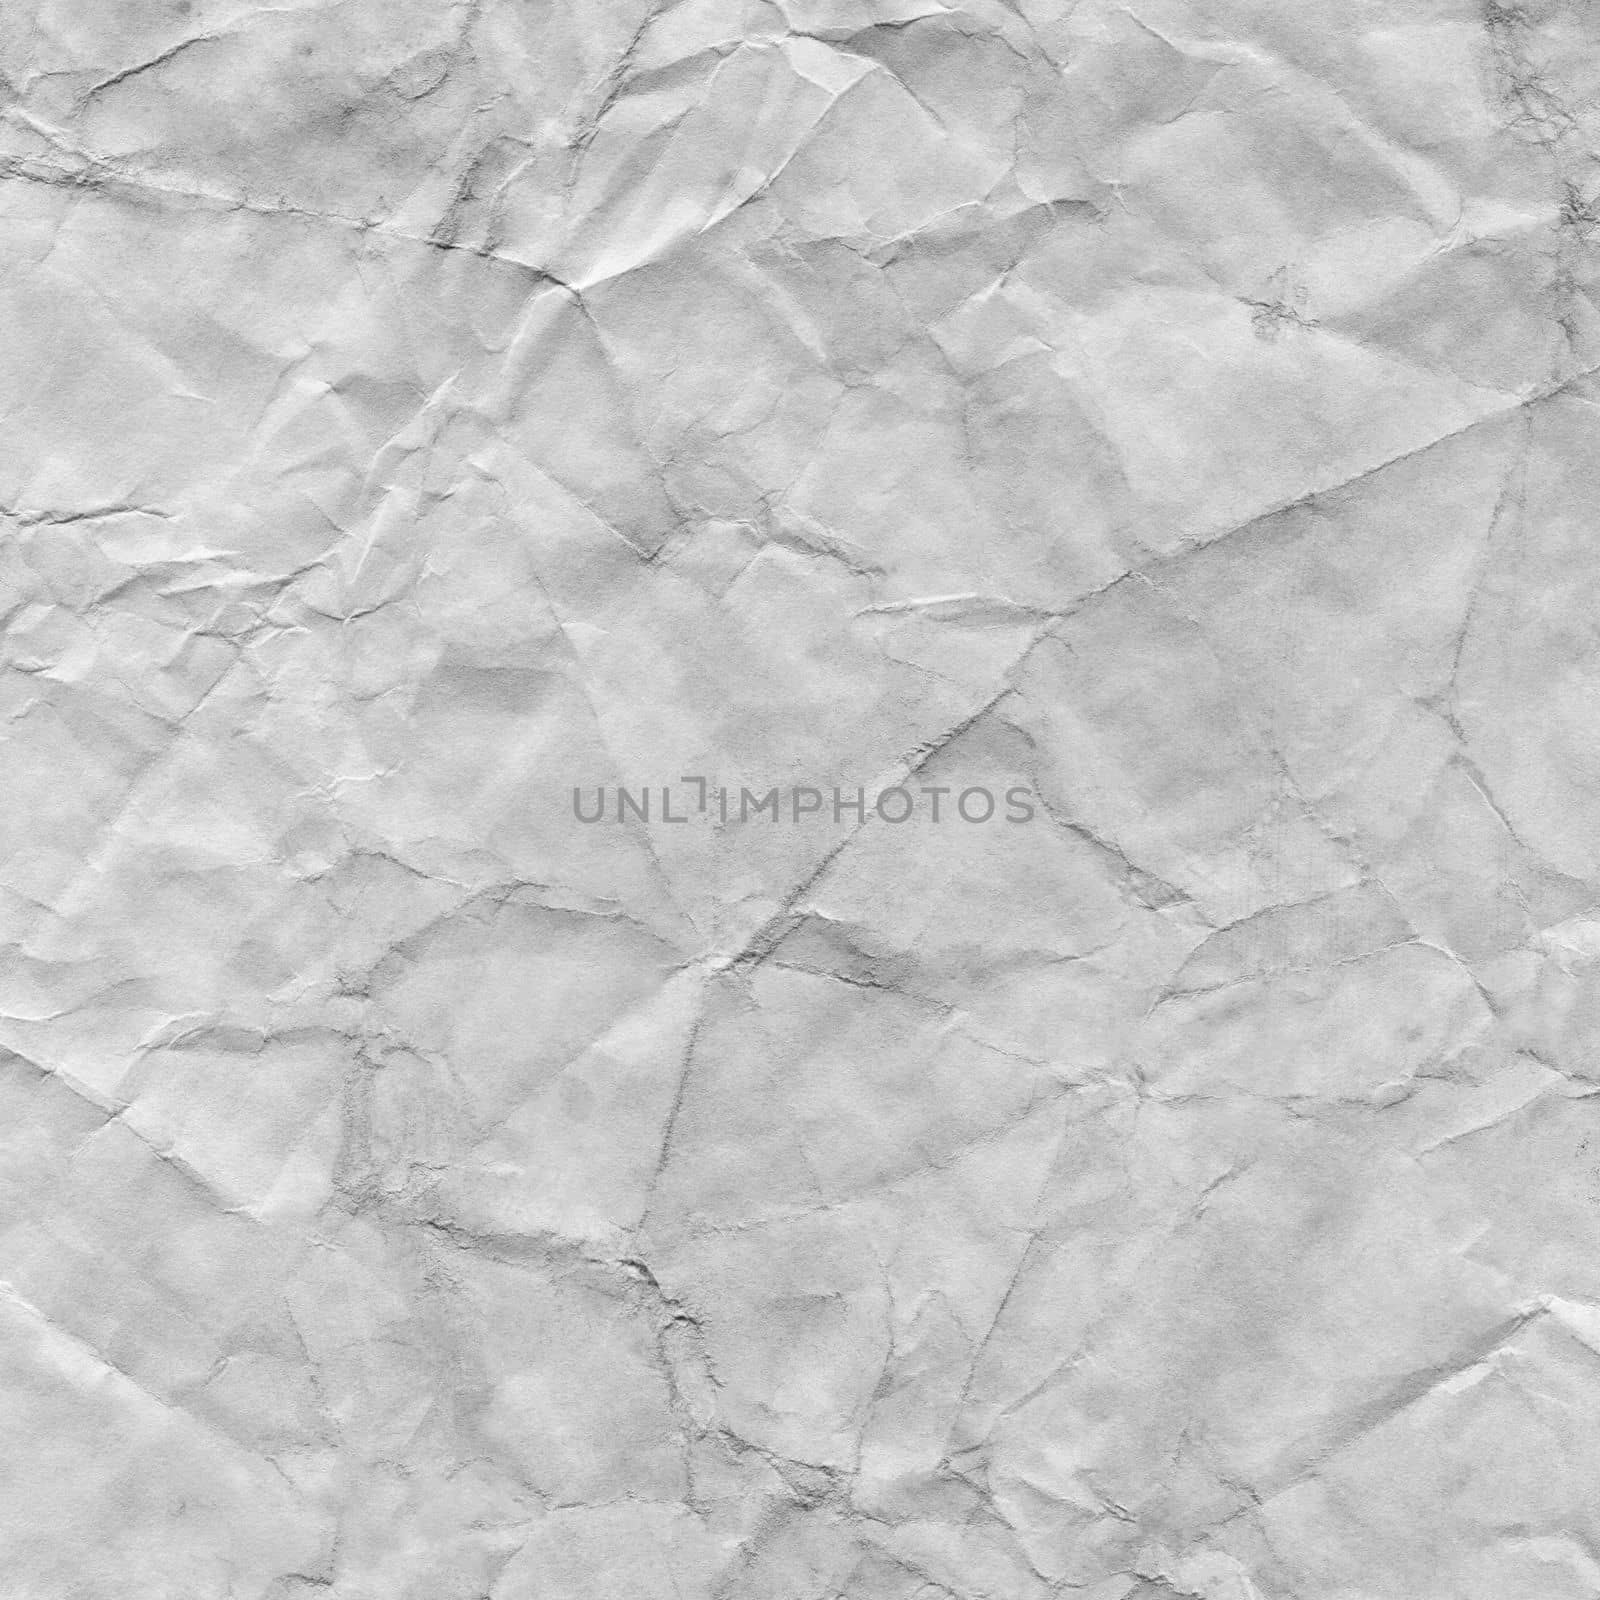 Abstract Gray Watercolor Background. Grey Watercolor Texture. Abstract Watercolor Hand Painted Background. Old Black and White Digital Paper. Vintage textured grunge background.